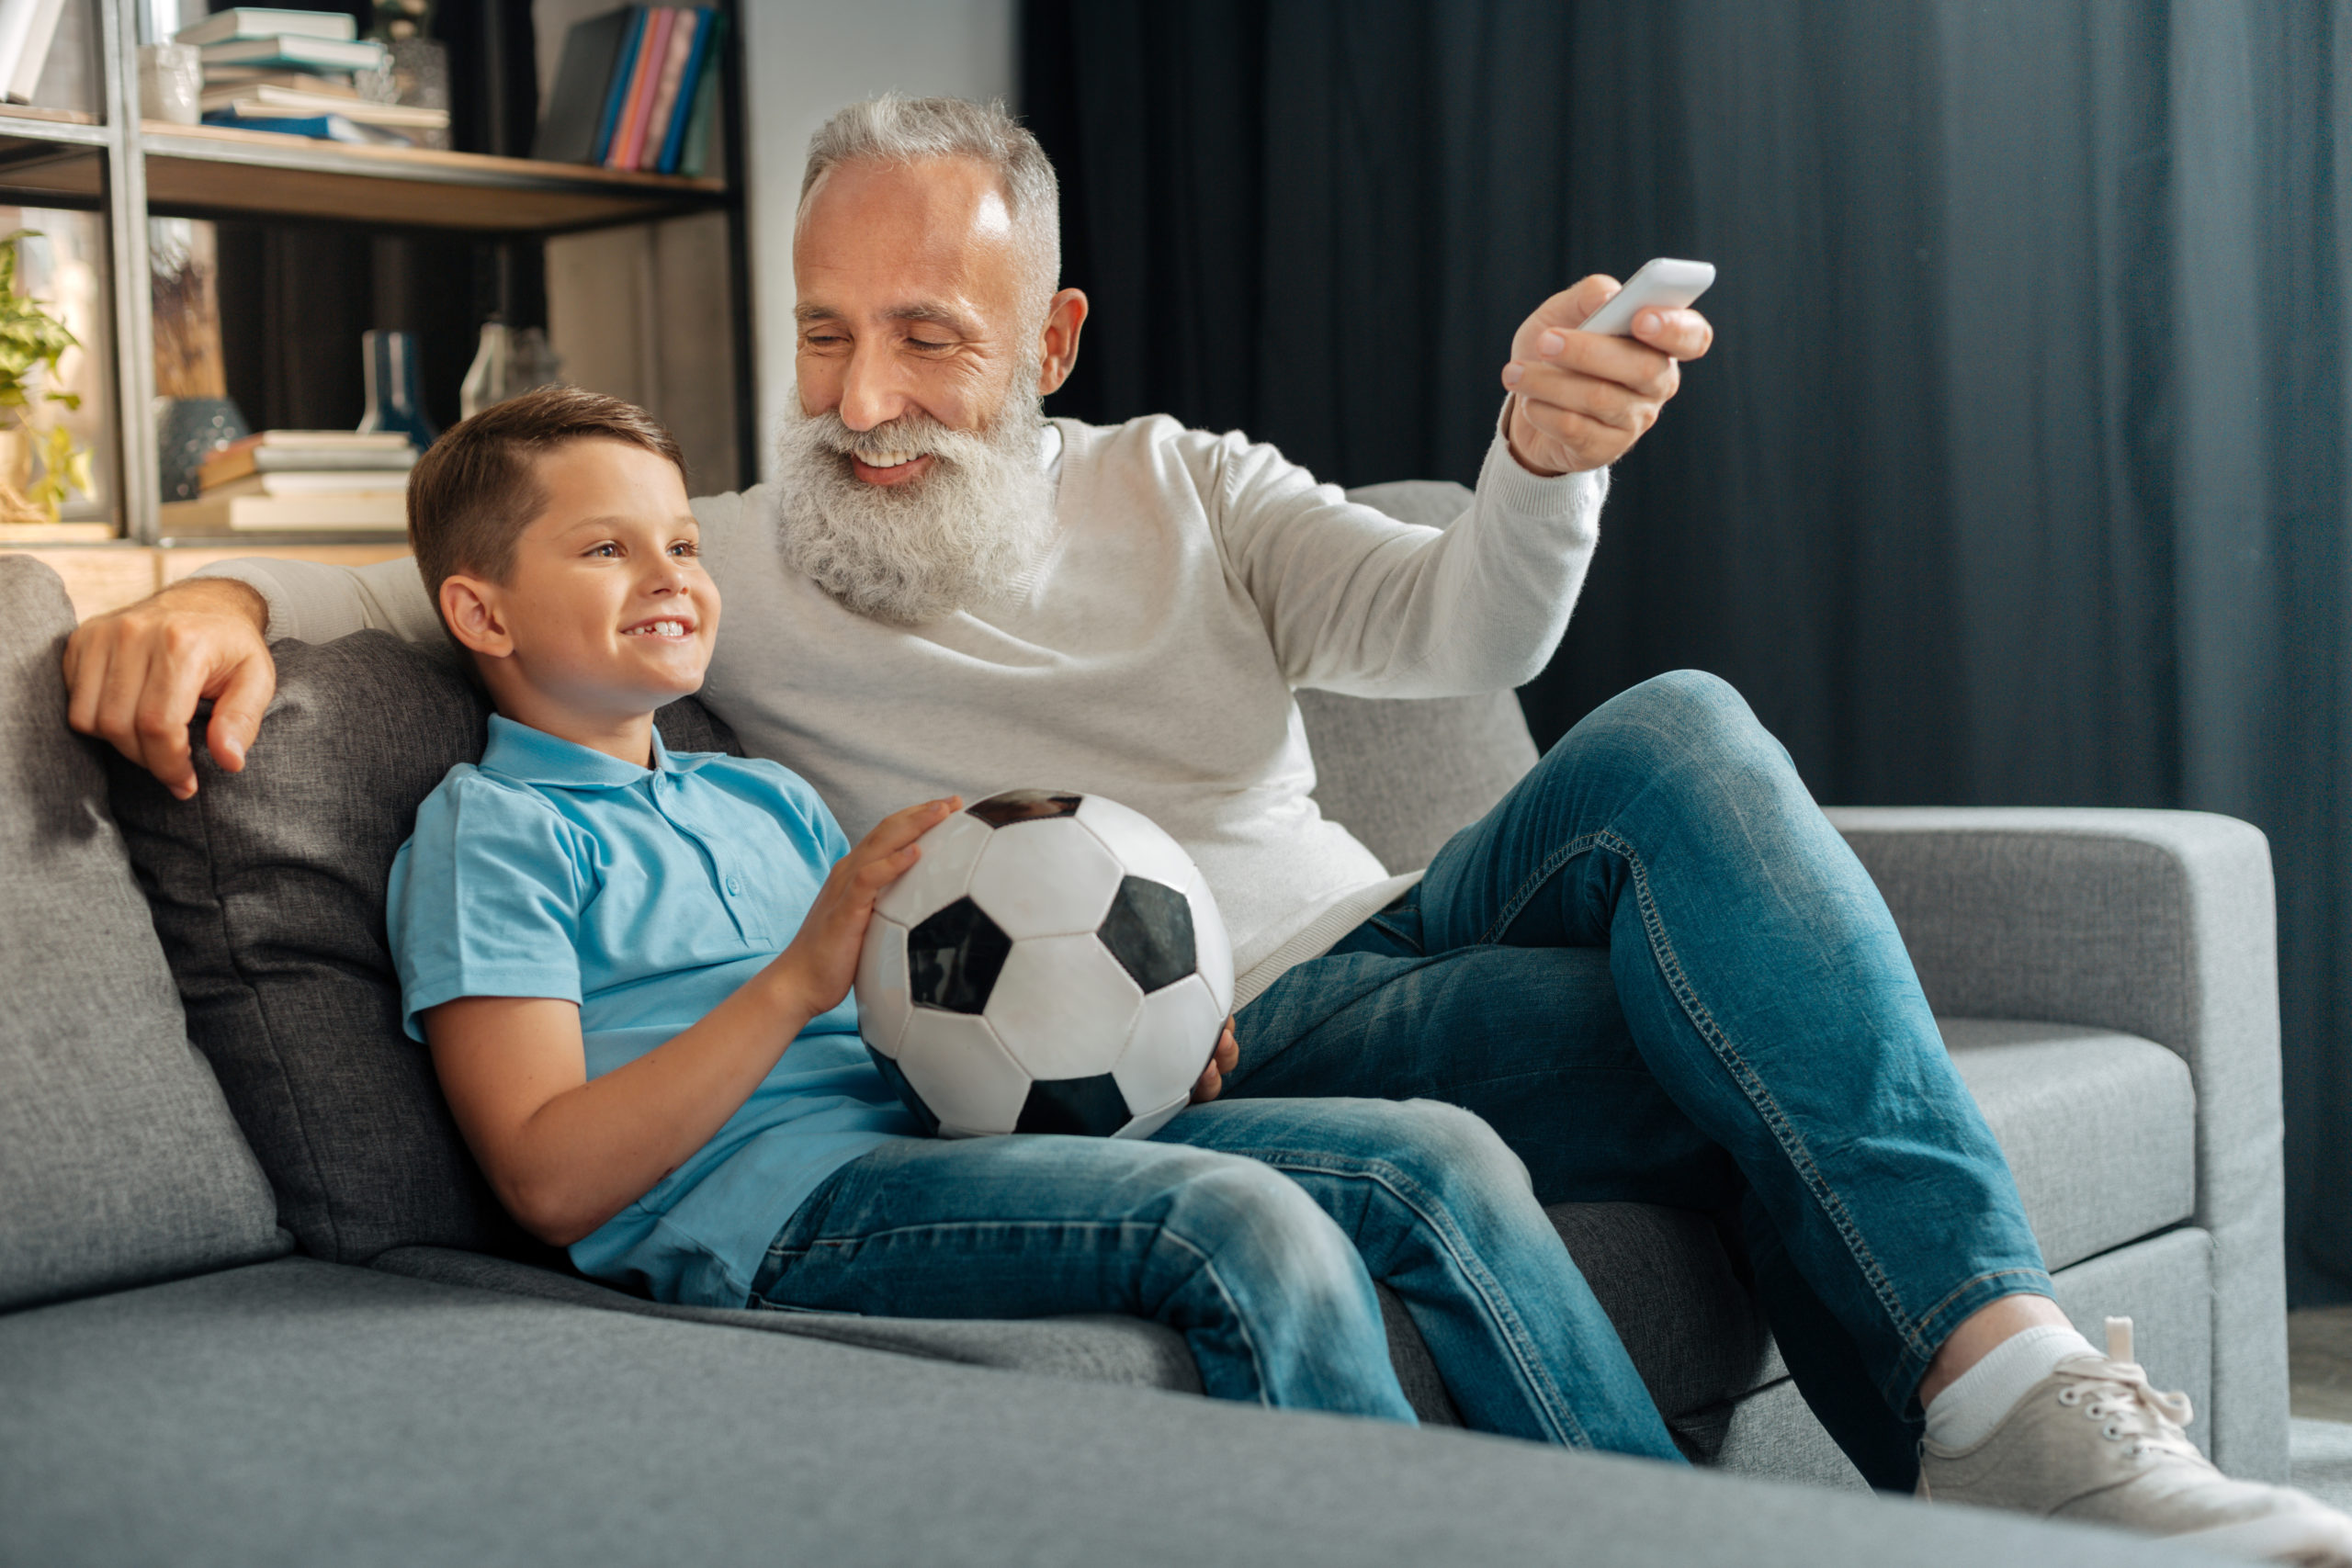 Man turning air conditioning on while watching football with grandson